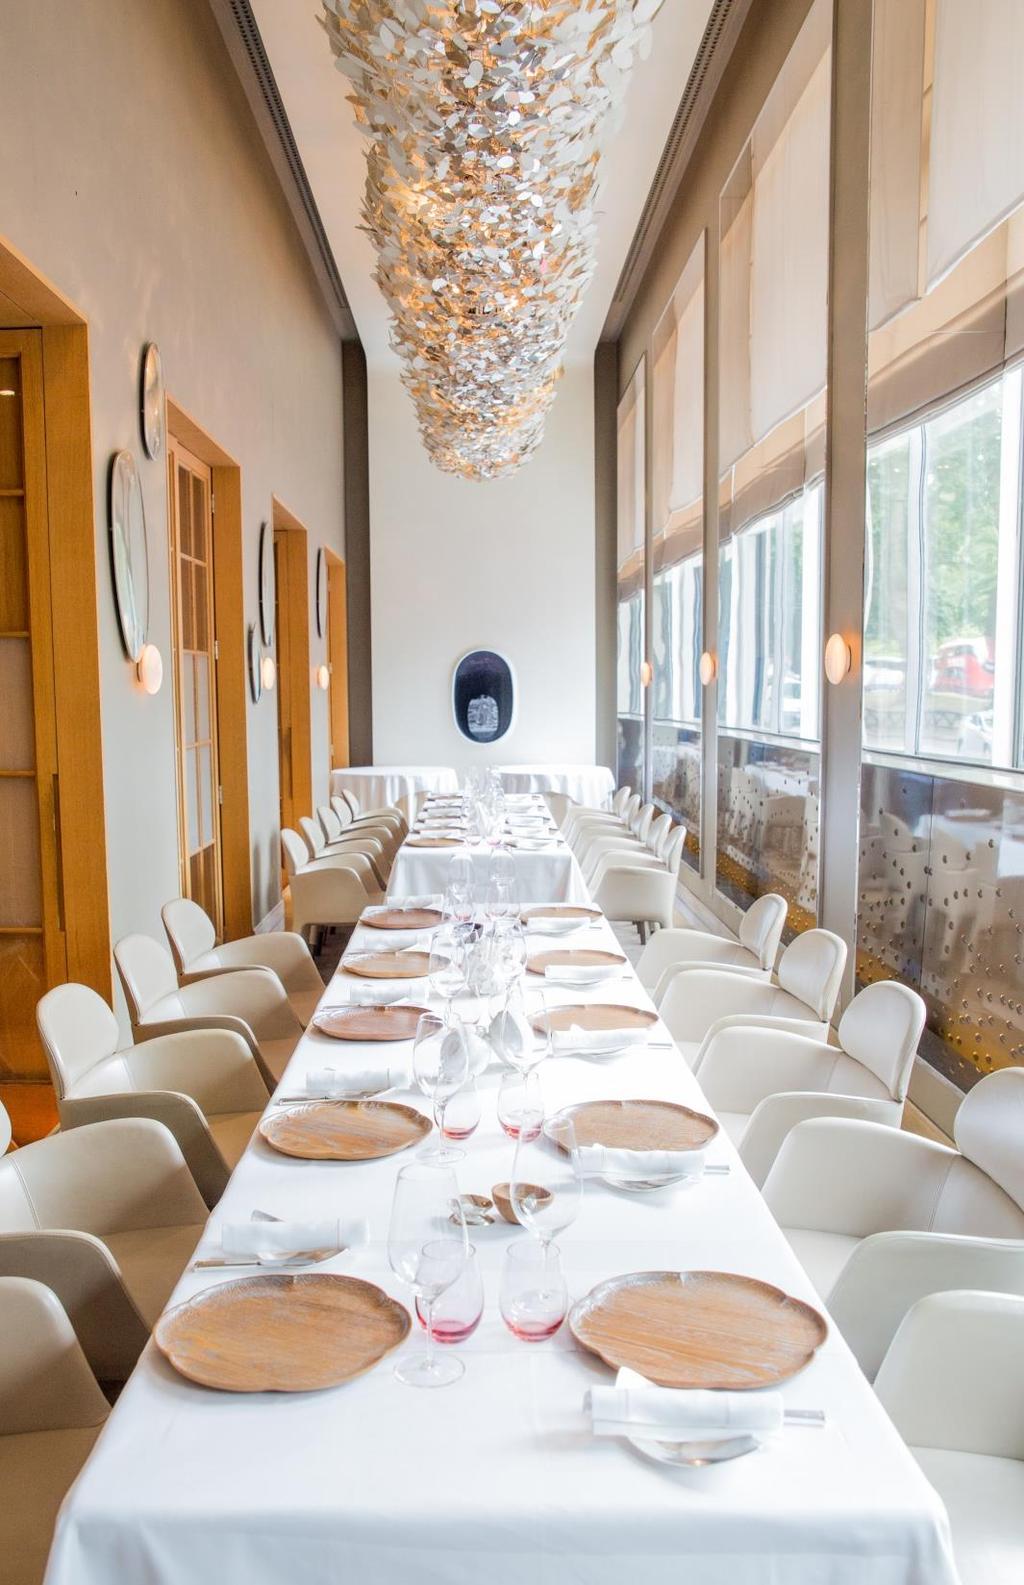 SALON PARK LANE With its high ceilings, an abundance of natural light and large oakframed French windows, Salon Park Lane brings an ambience of tranquillity to any private luncheon or dinner and